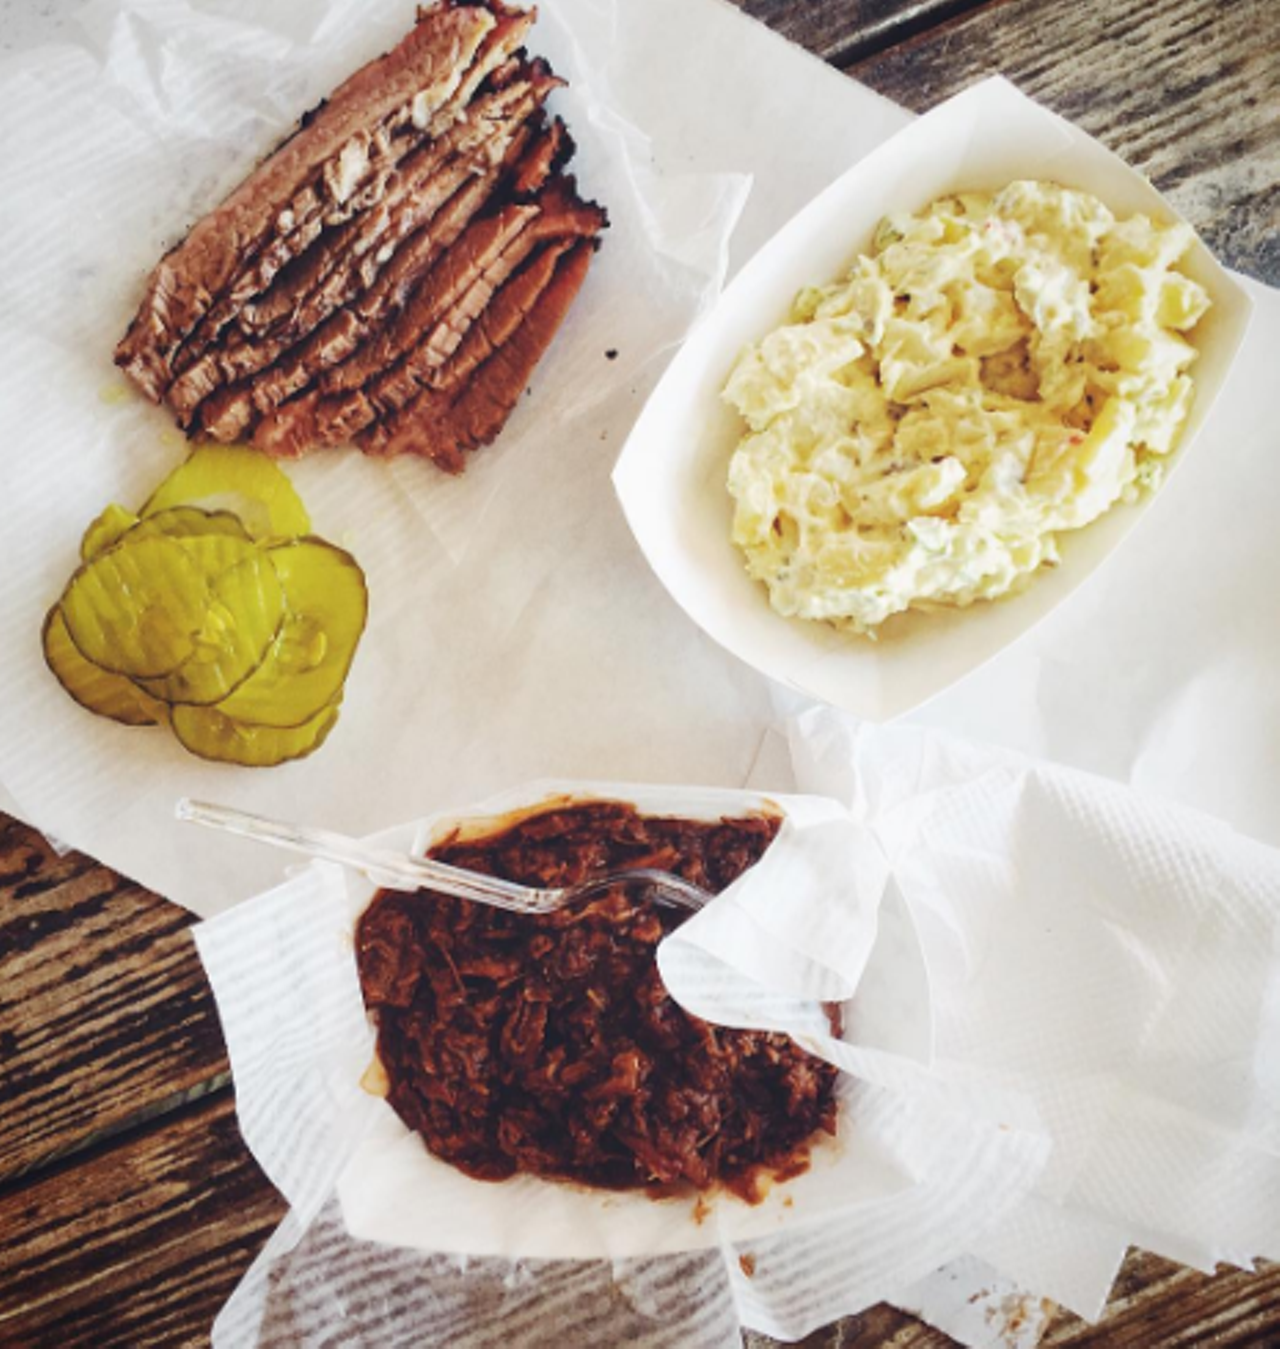  Best Barbecue:Rudy's Country Store & Bar-B-Q 
Photo via Instagram/thedomesticman